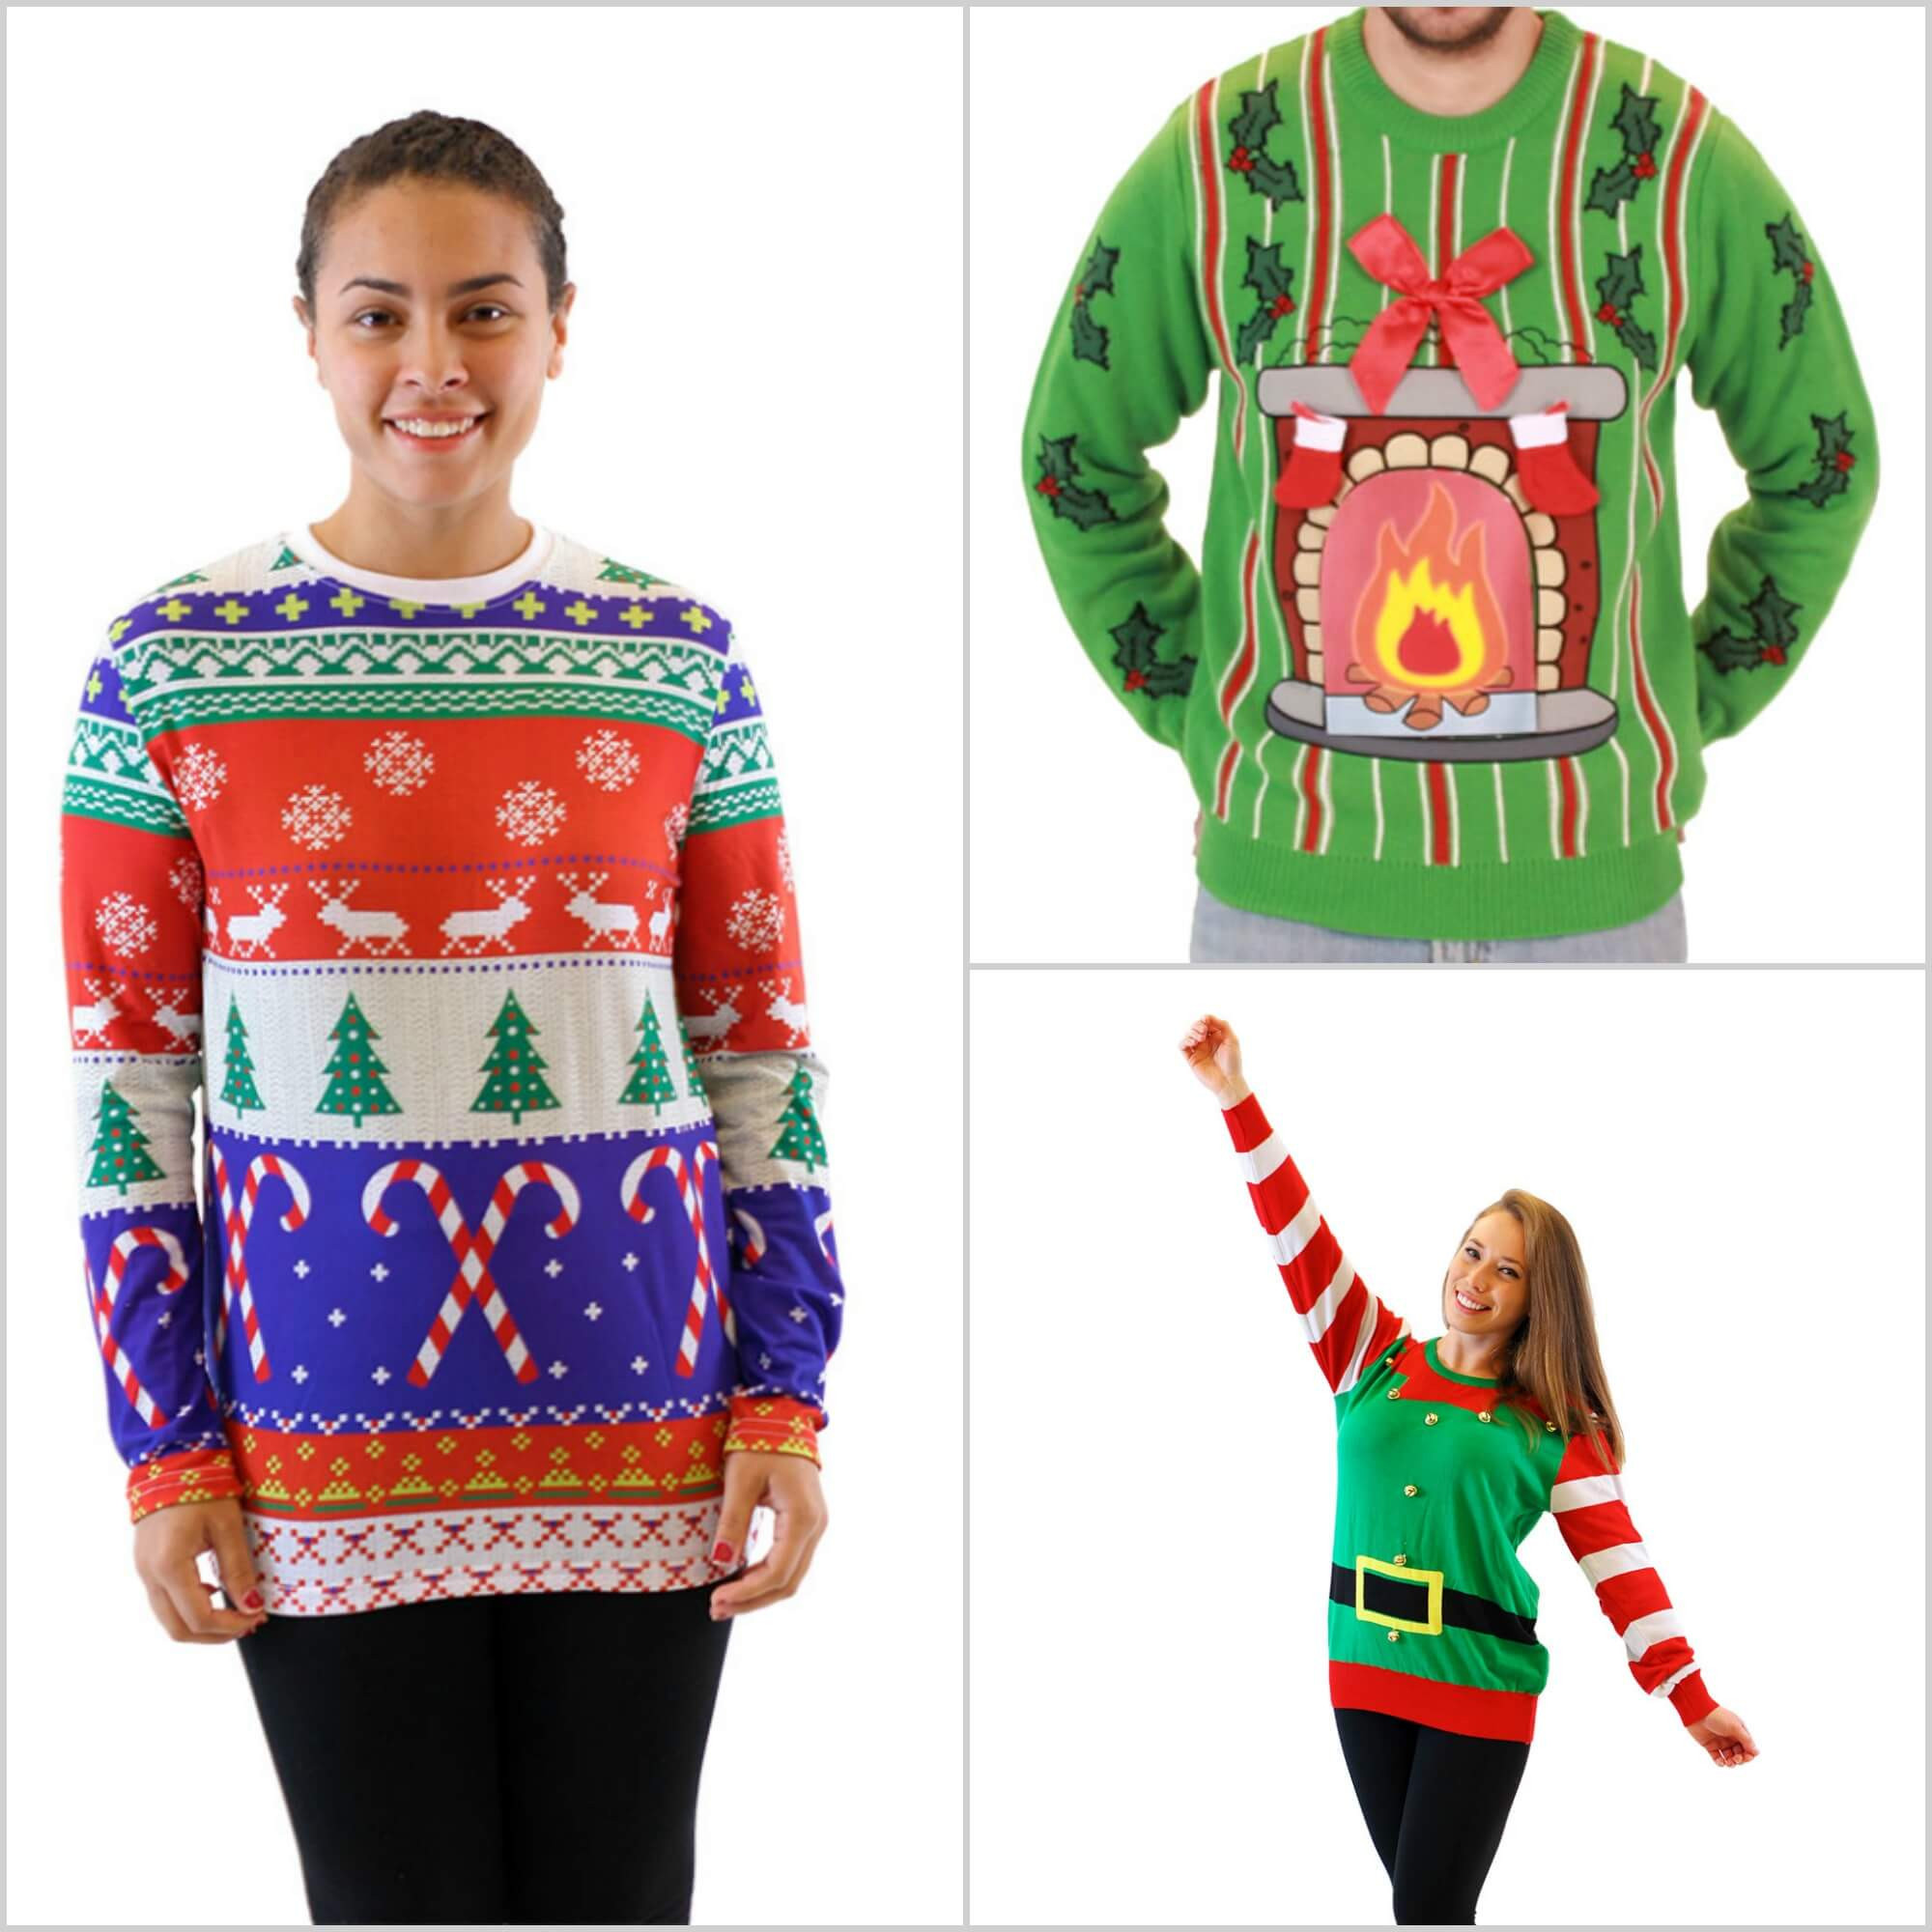 Ugly Sweater Ideas For Christmas Parties
 Ugly Christmas Sweater Party Ideas